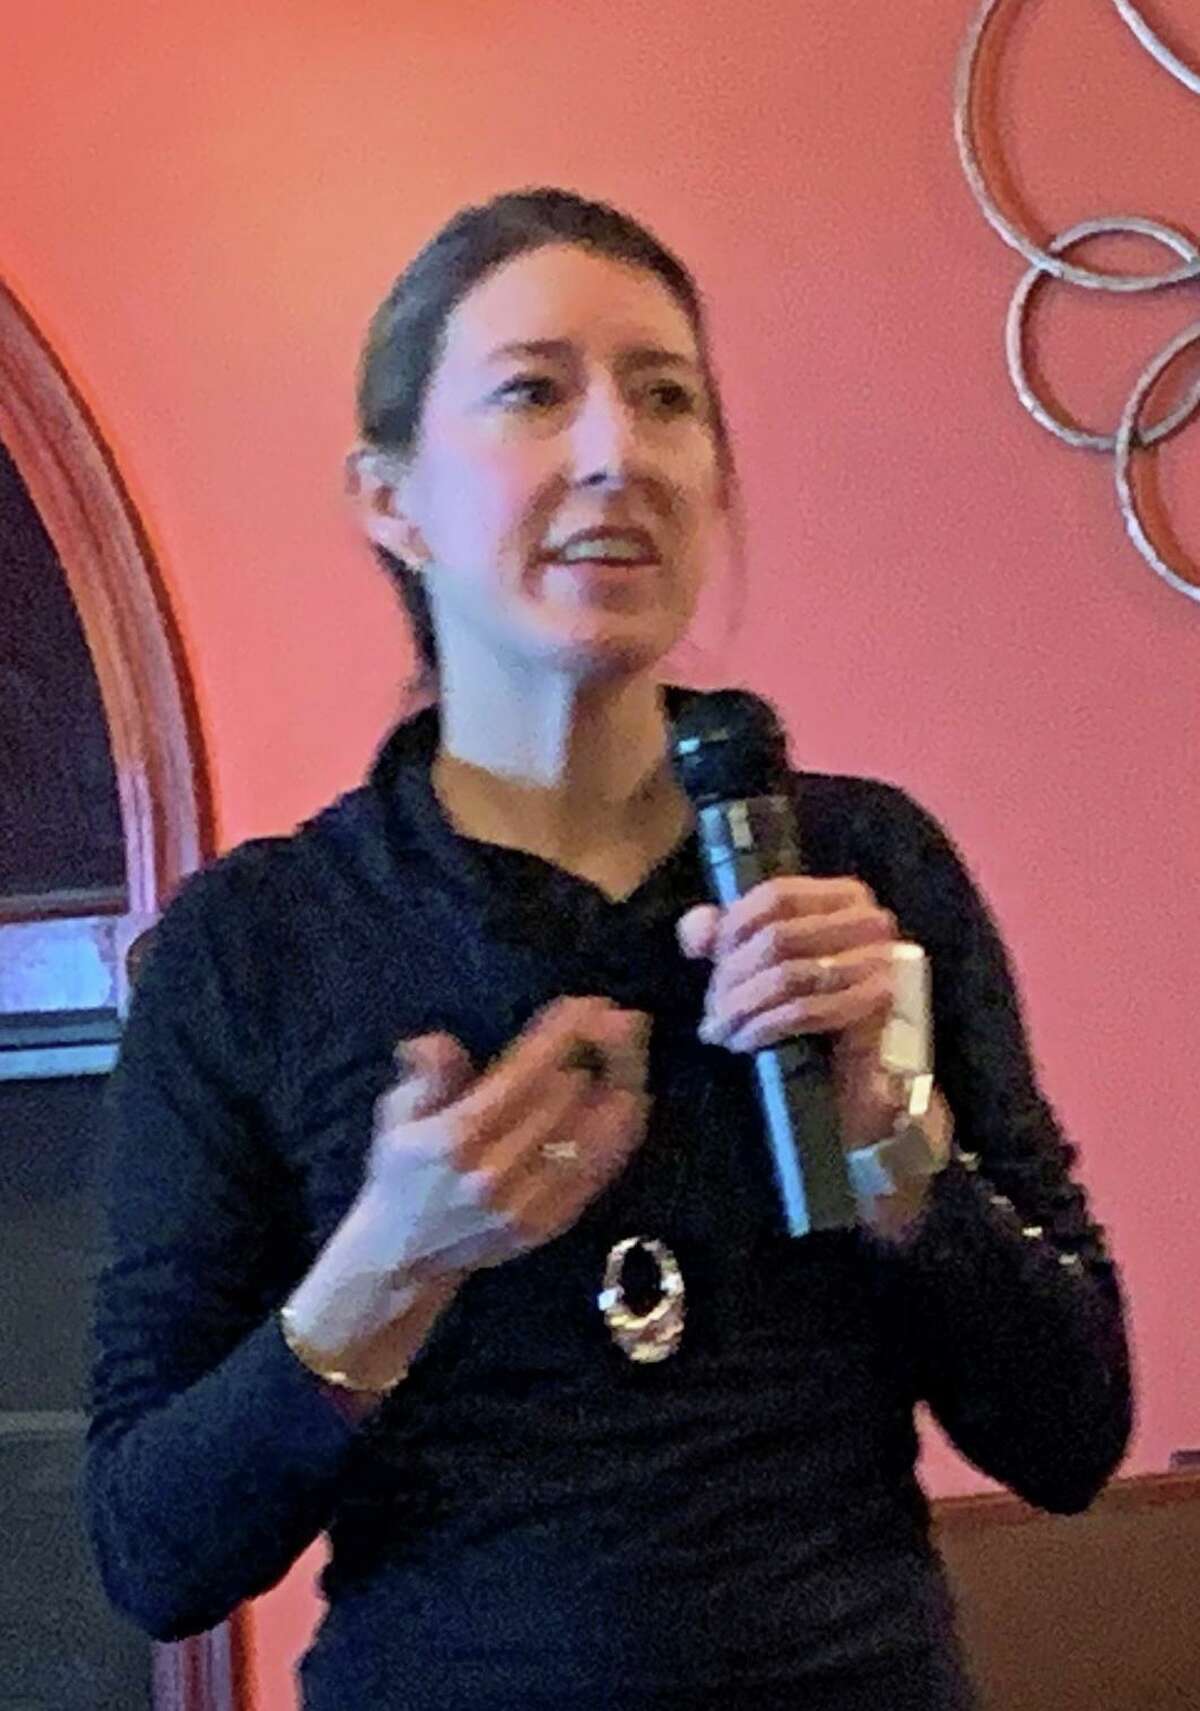 Sue Duval, owner of the Newtown-based The Organized Hive, gave decluttering tips to the Working Women’s Forum at the Villa Restaurant in Newtown Wednesday night.